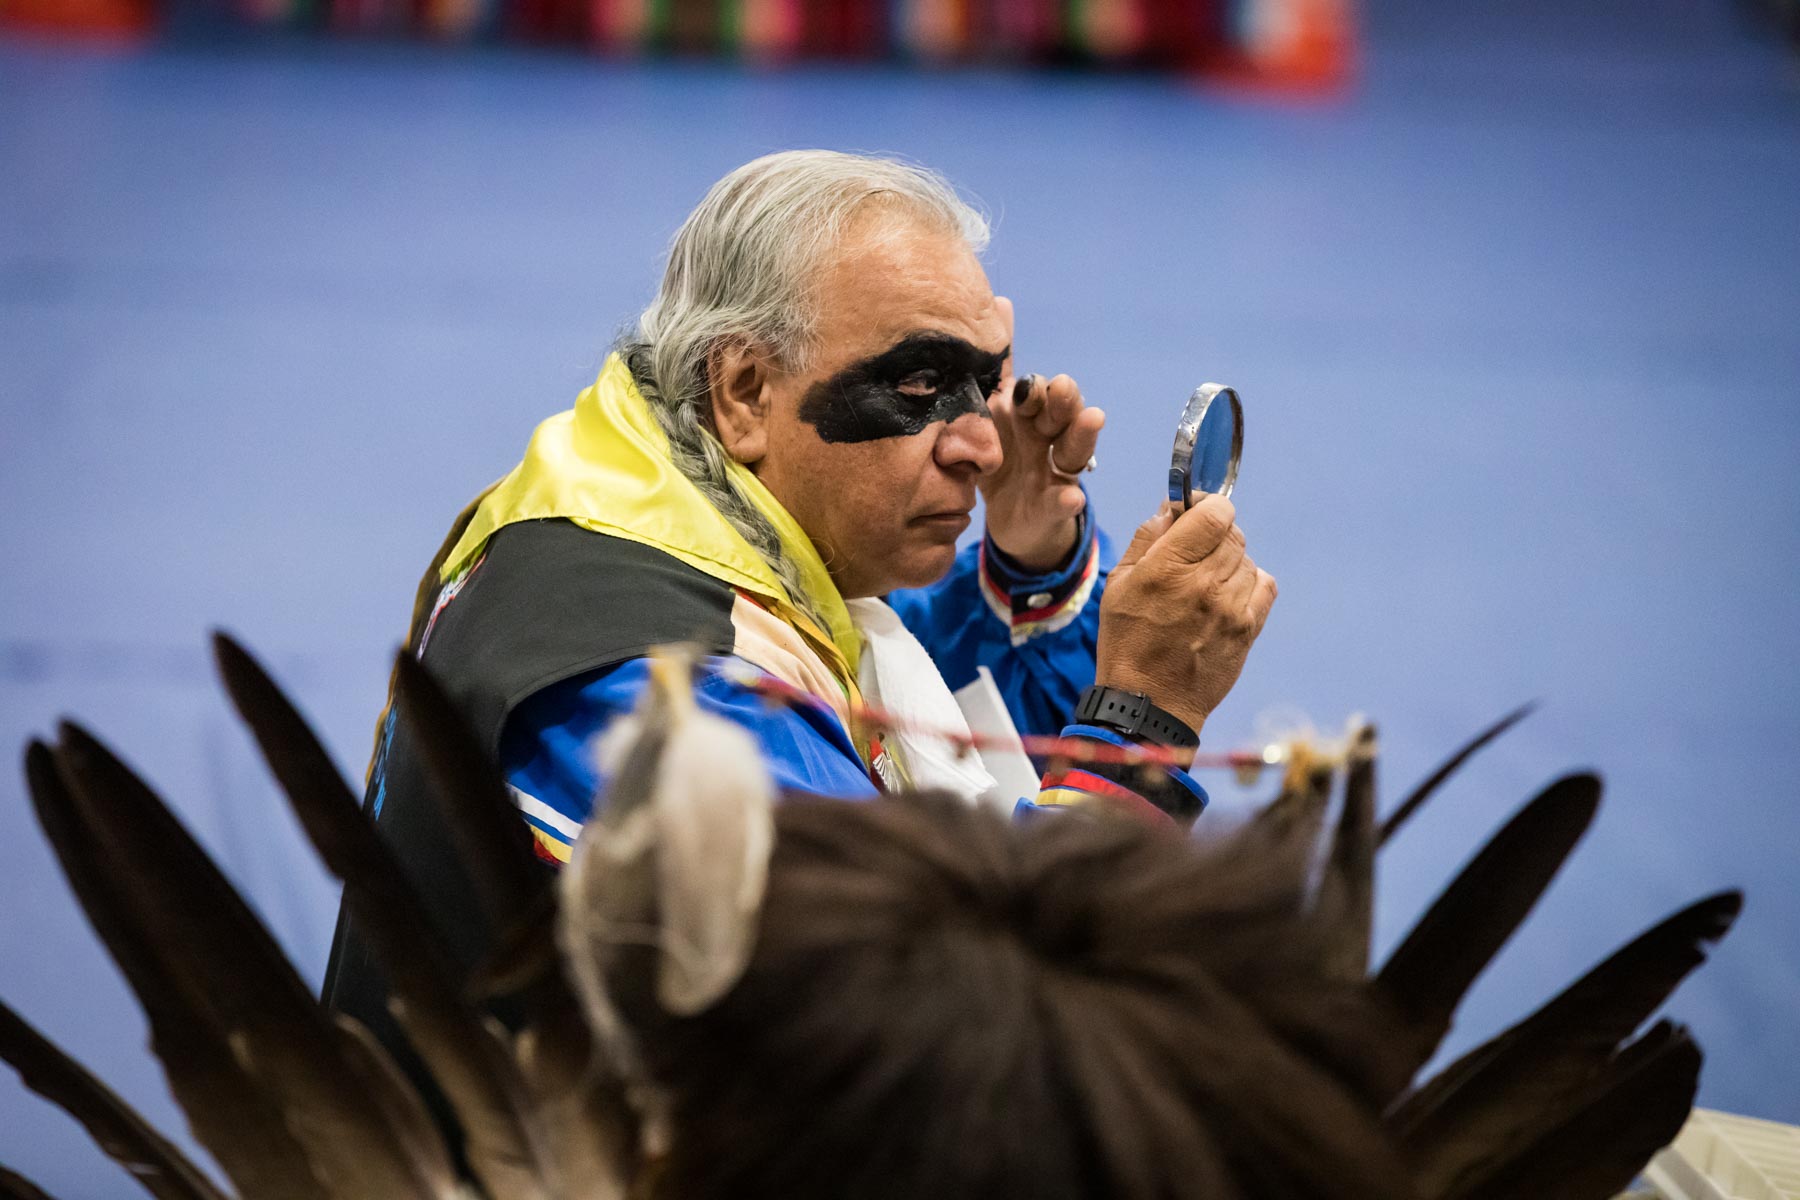 Man putting on Native American black eye makeup at pow wow for an article on the Fiesta photo tips